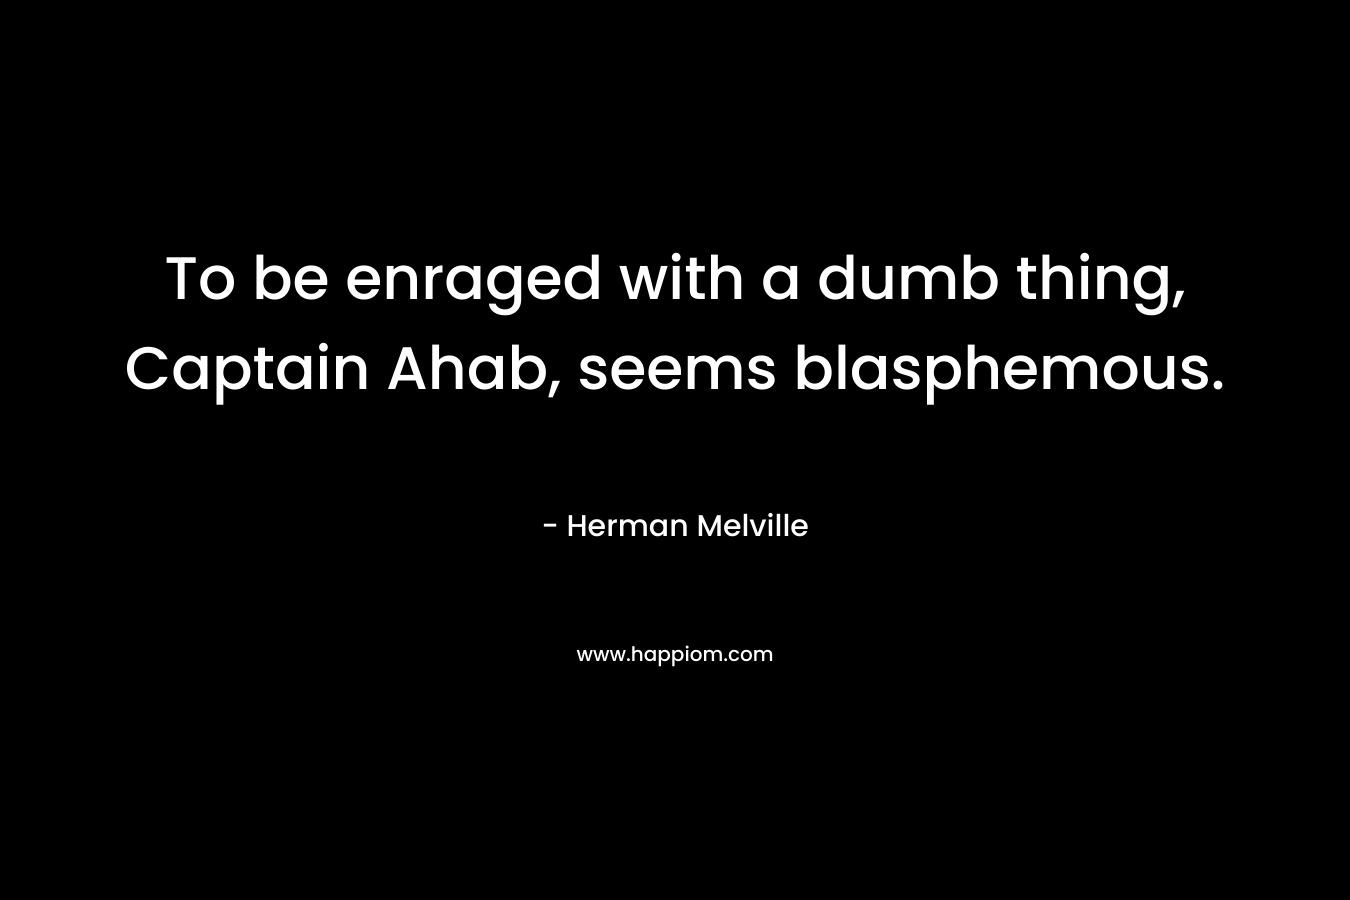 To be enraged with a dumb thing, Captain Ahab, seems blasphemous. – Herman Melville